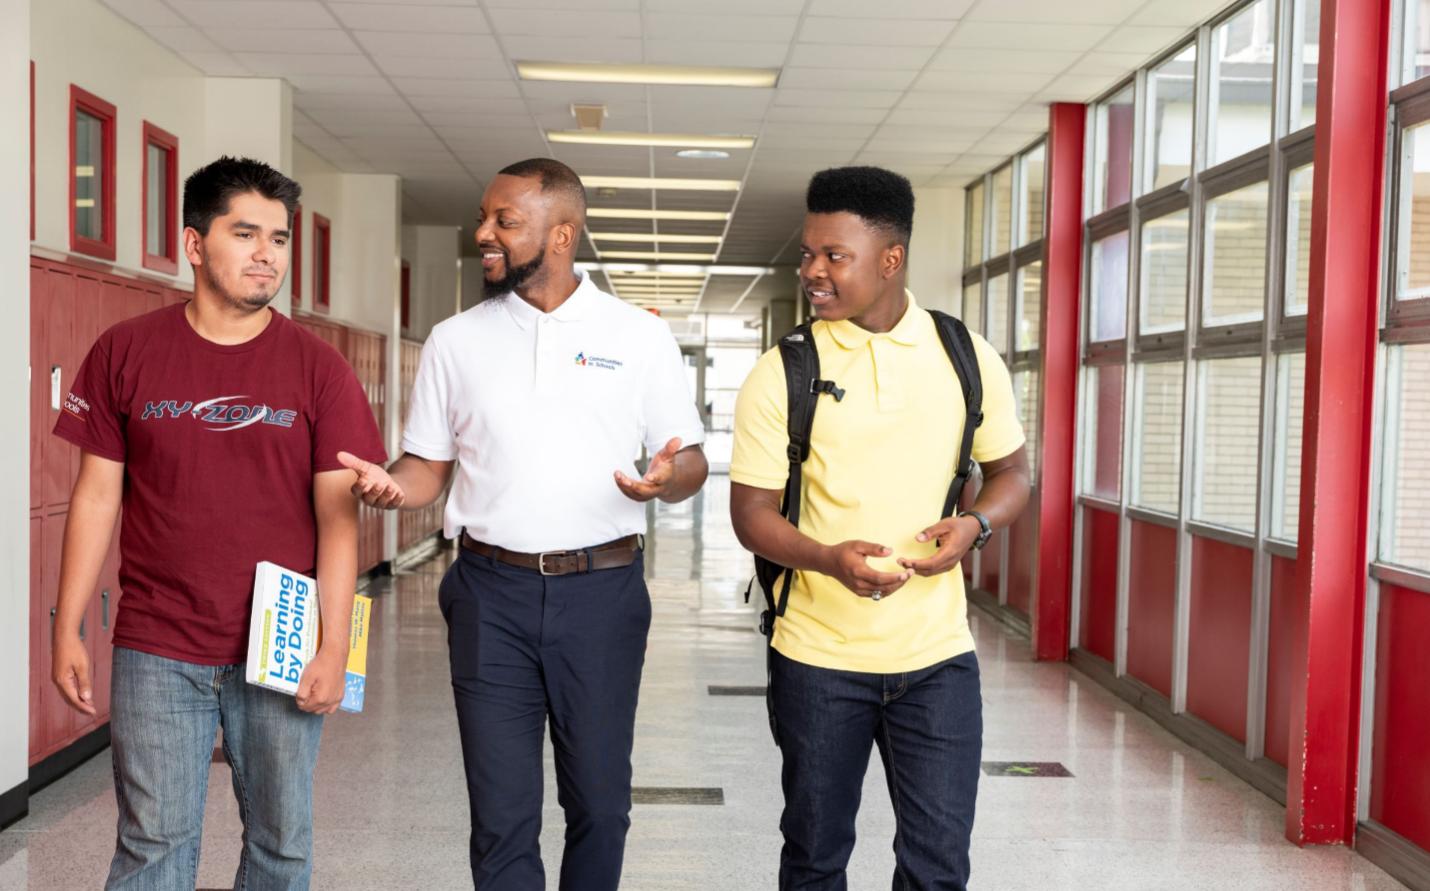 Two students and an adult walk the halls of a high school.